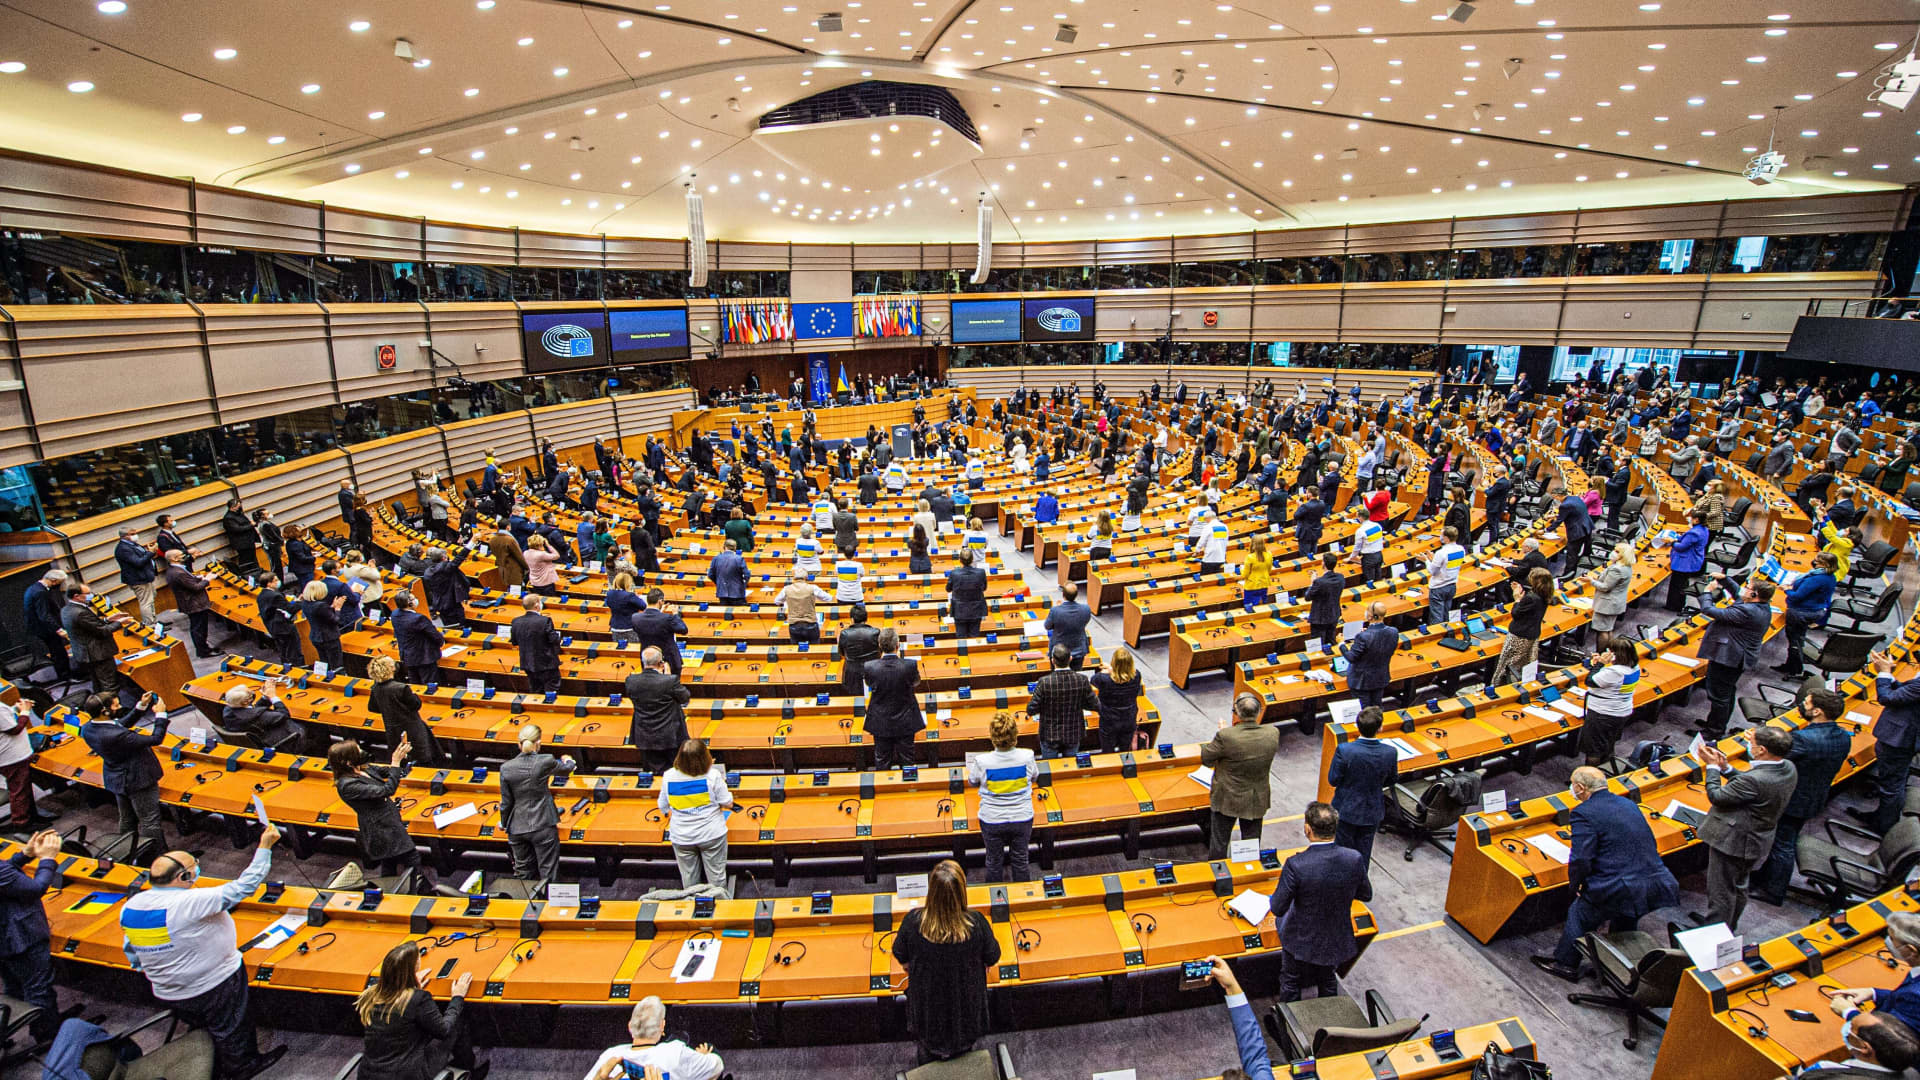 Parliament members give a standing ovation after a live video address of Ukrainian President Volodymyr Zelenskyy, during an extraordinary plenary session of the European parliament on Russian invasion of Ukraine, in Brussels, on March 1, 2022.